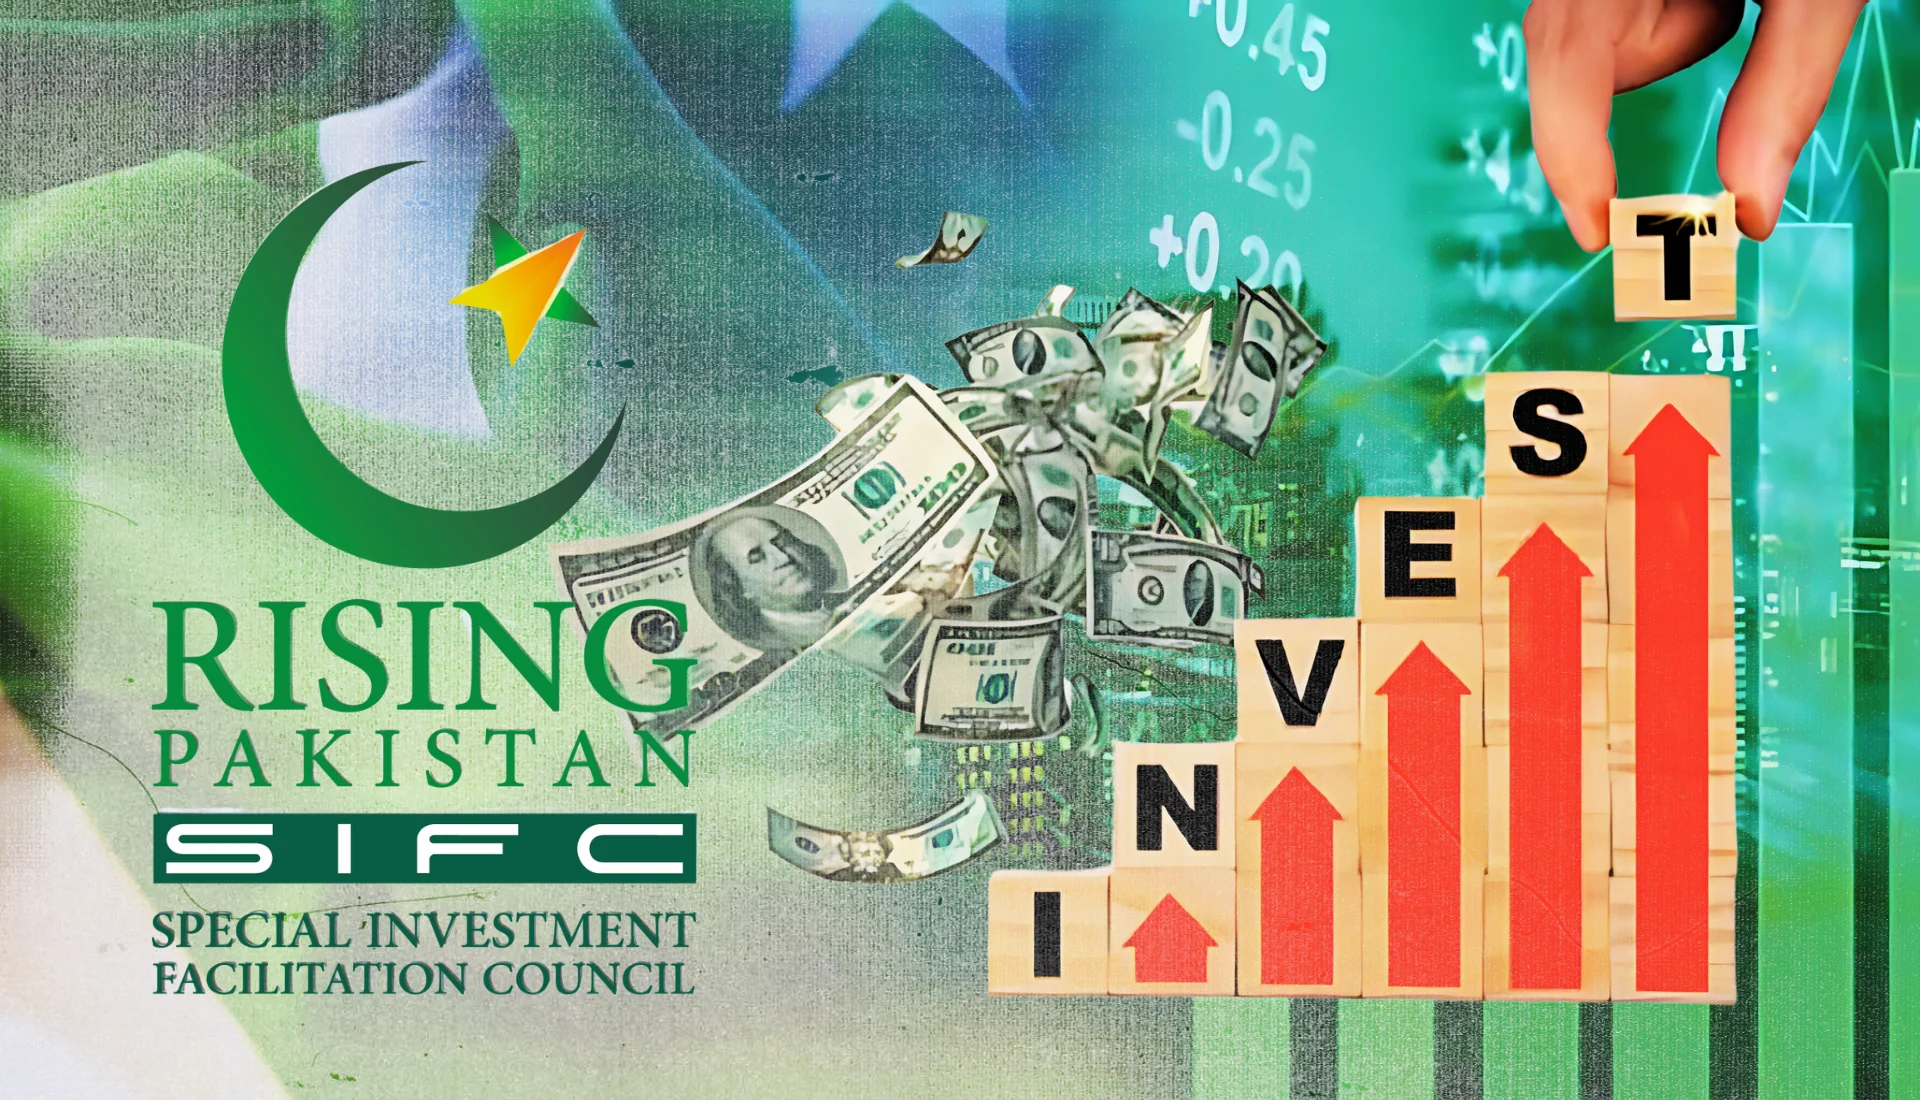 Pakistan's SIFC celebrates one year with early FDI wins, but can it overcome challenges to unlock lasting economic growth? [Image via SAT Creatives].